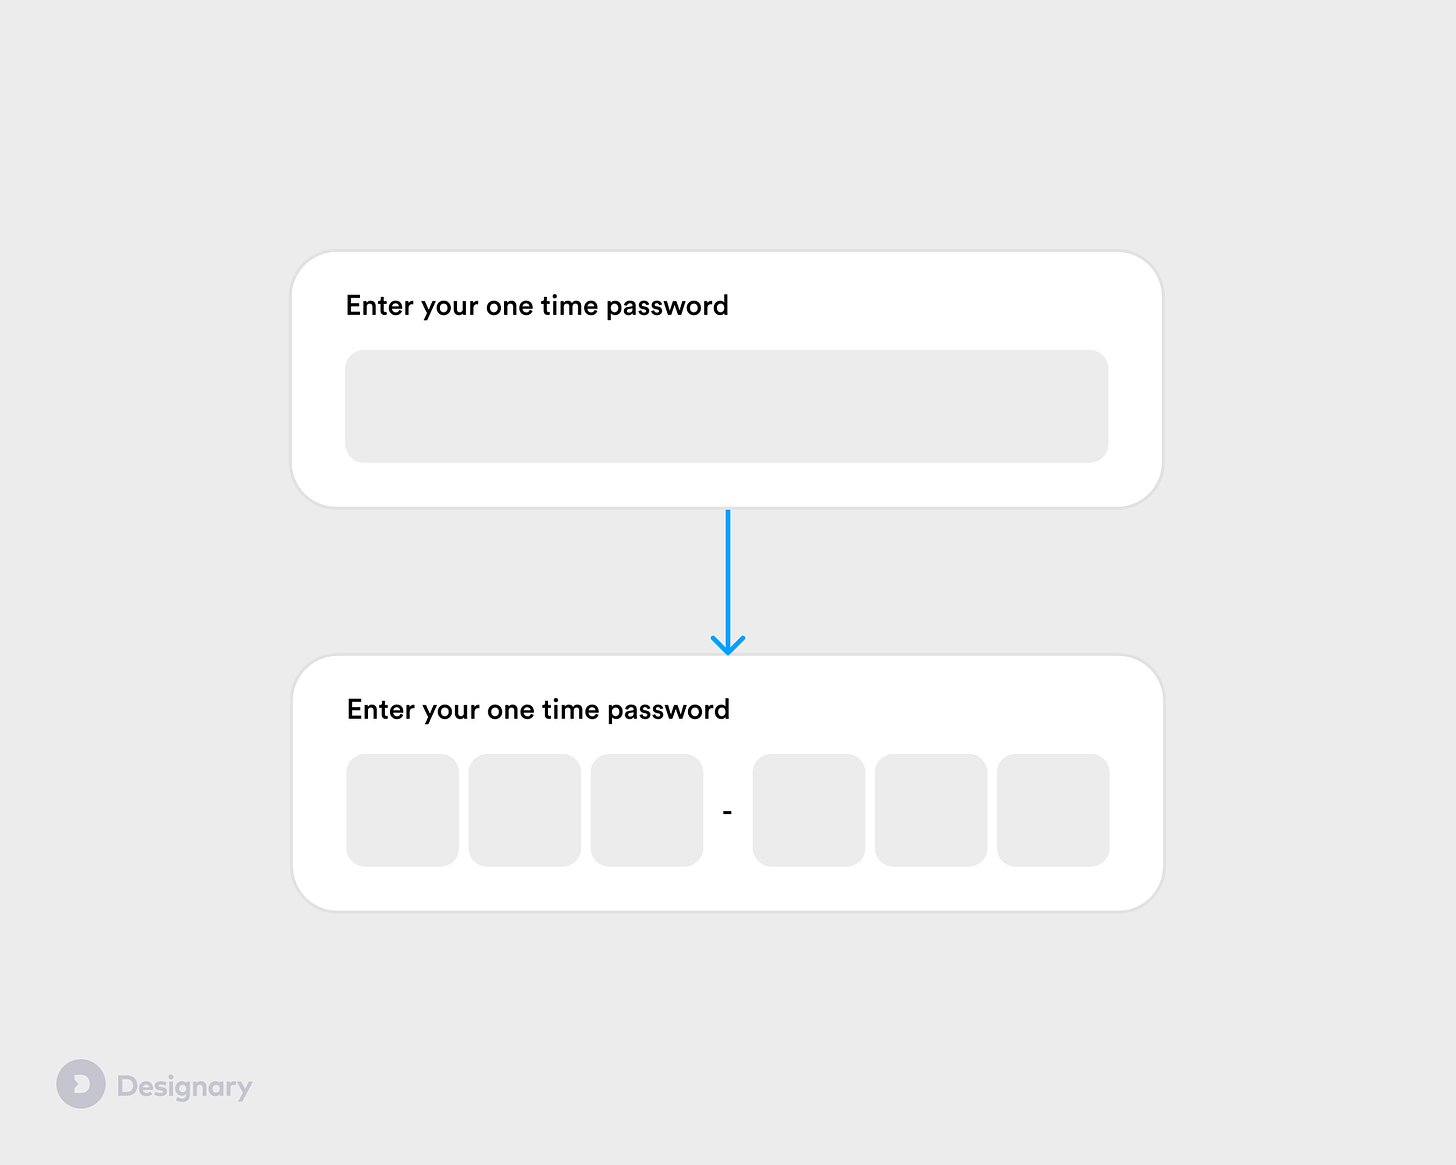 Chunking in One-time Passwords